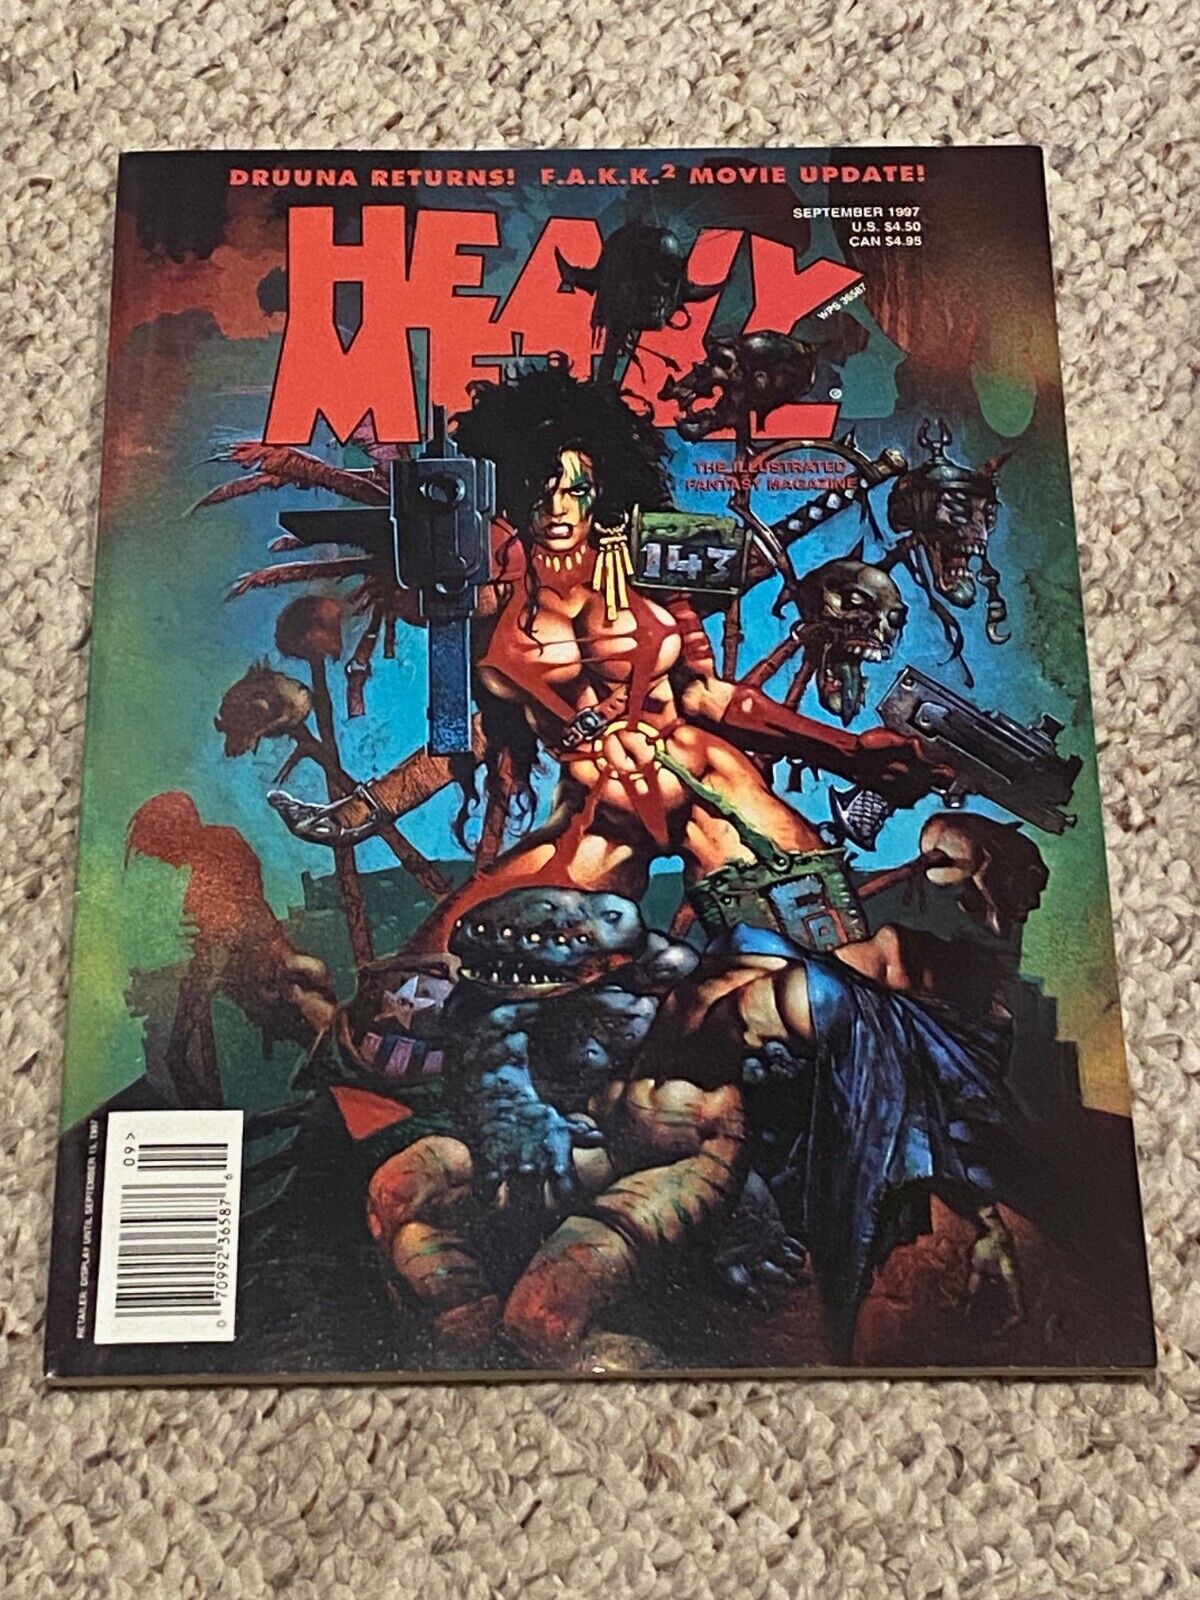 HEAVY METAL MAGAZINE WITH COVER BY SIMON BISLEY